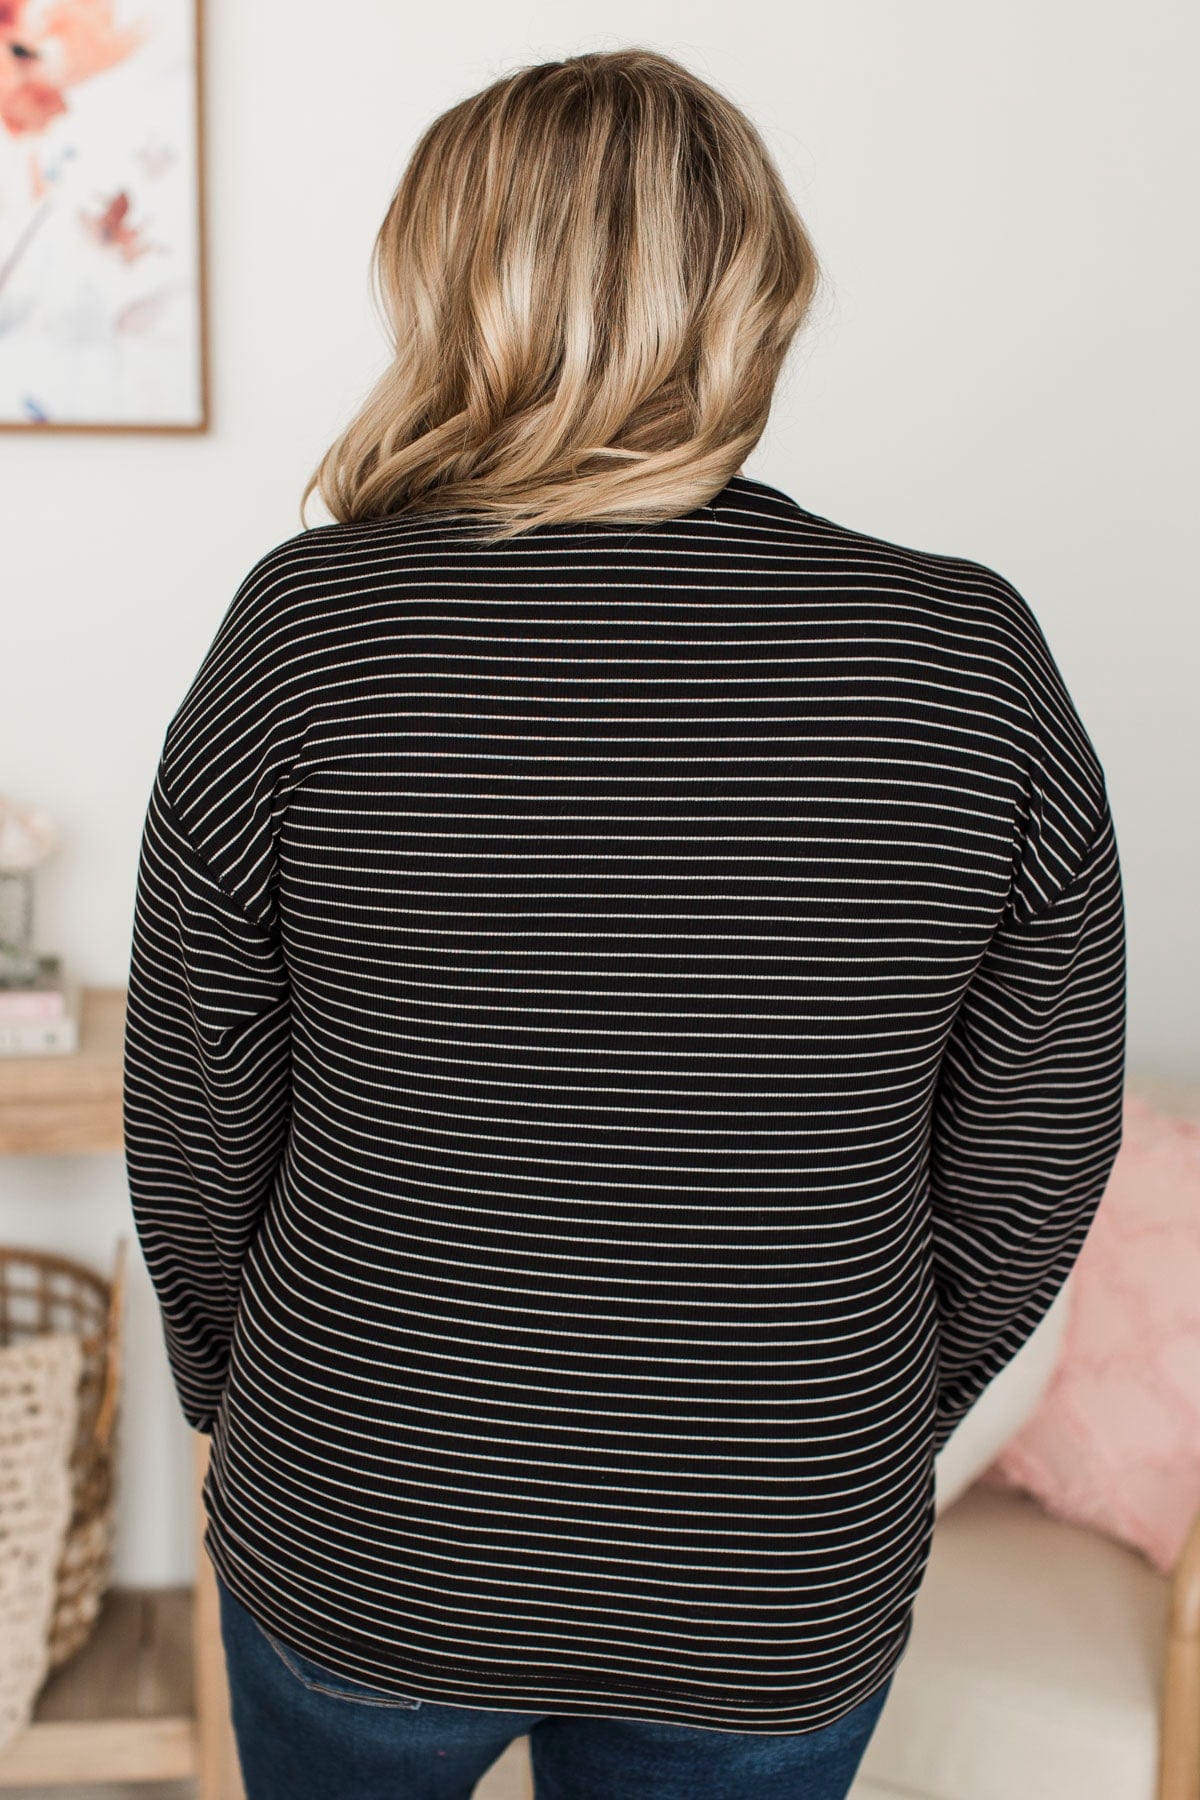 Everyday Mood Striped Pullover Top- Black